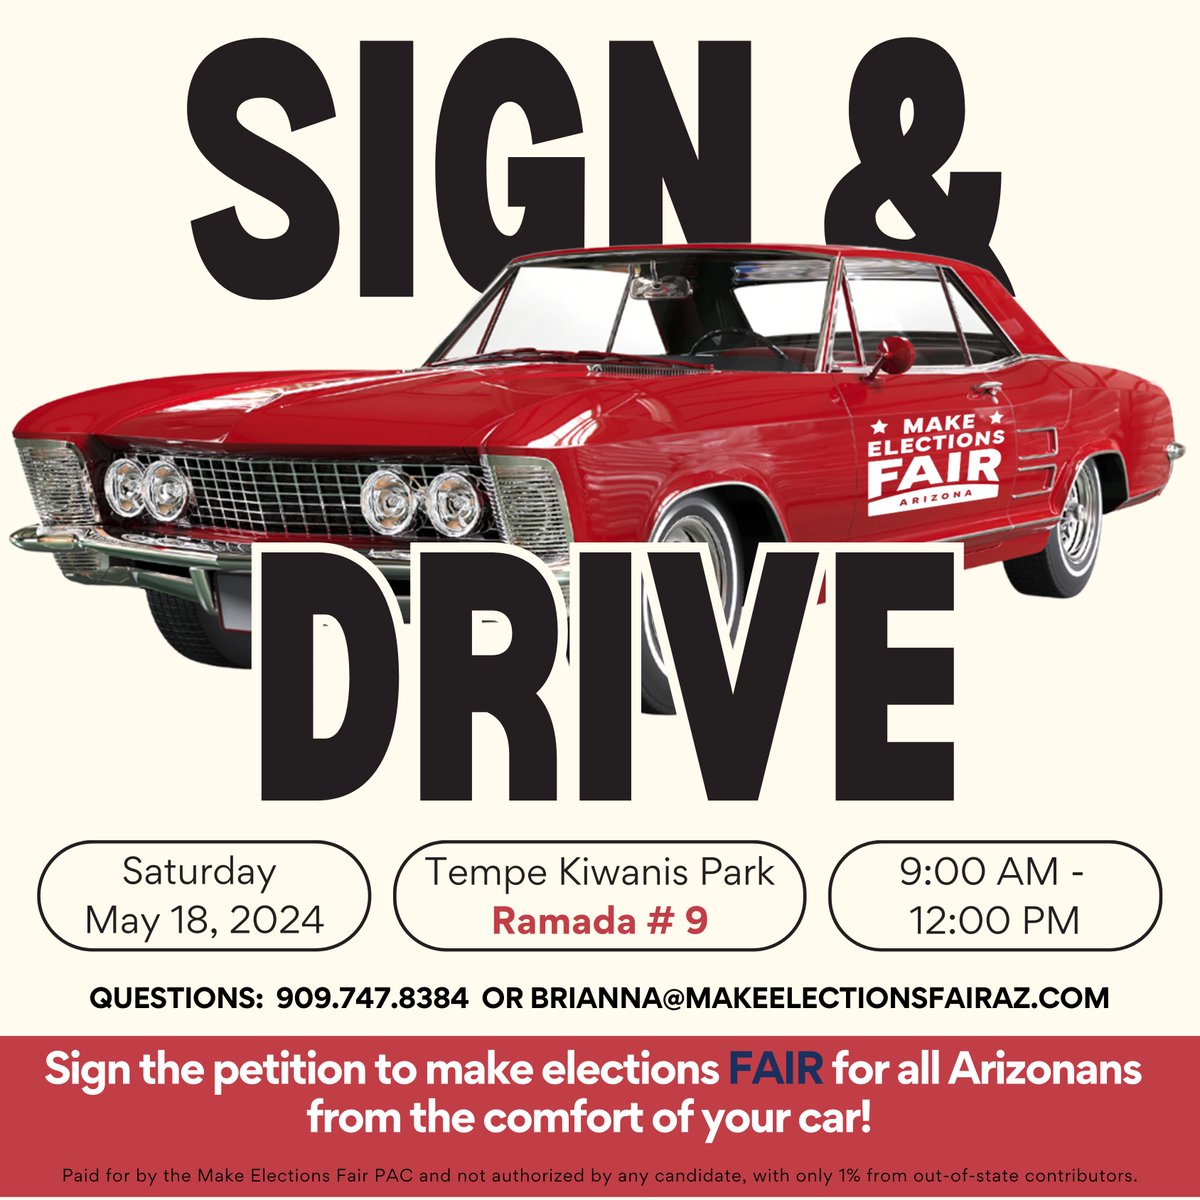 🚗 🖊️THIS WEEKEND Sign the petition to make elections FAIR for all Arizonans from the comfort of your car! Volunteers will be at Kiwanis Park Tempe in Ramada #9! ☎️Call, text or email with questions: 909.747.8384 or brianna@makeelectionsfairaz.com 🖱️More event info: